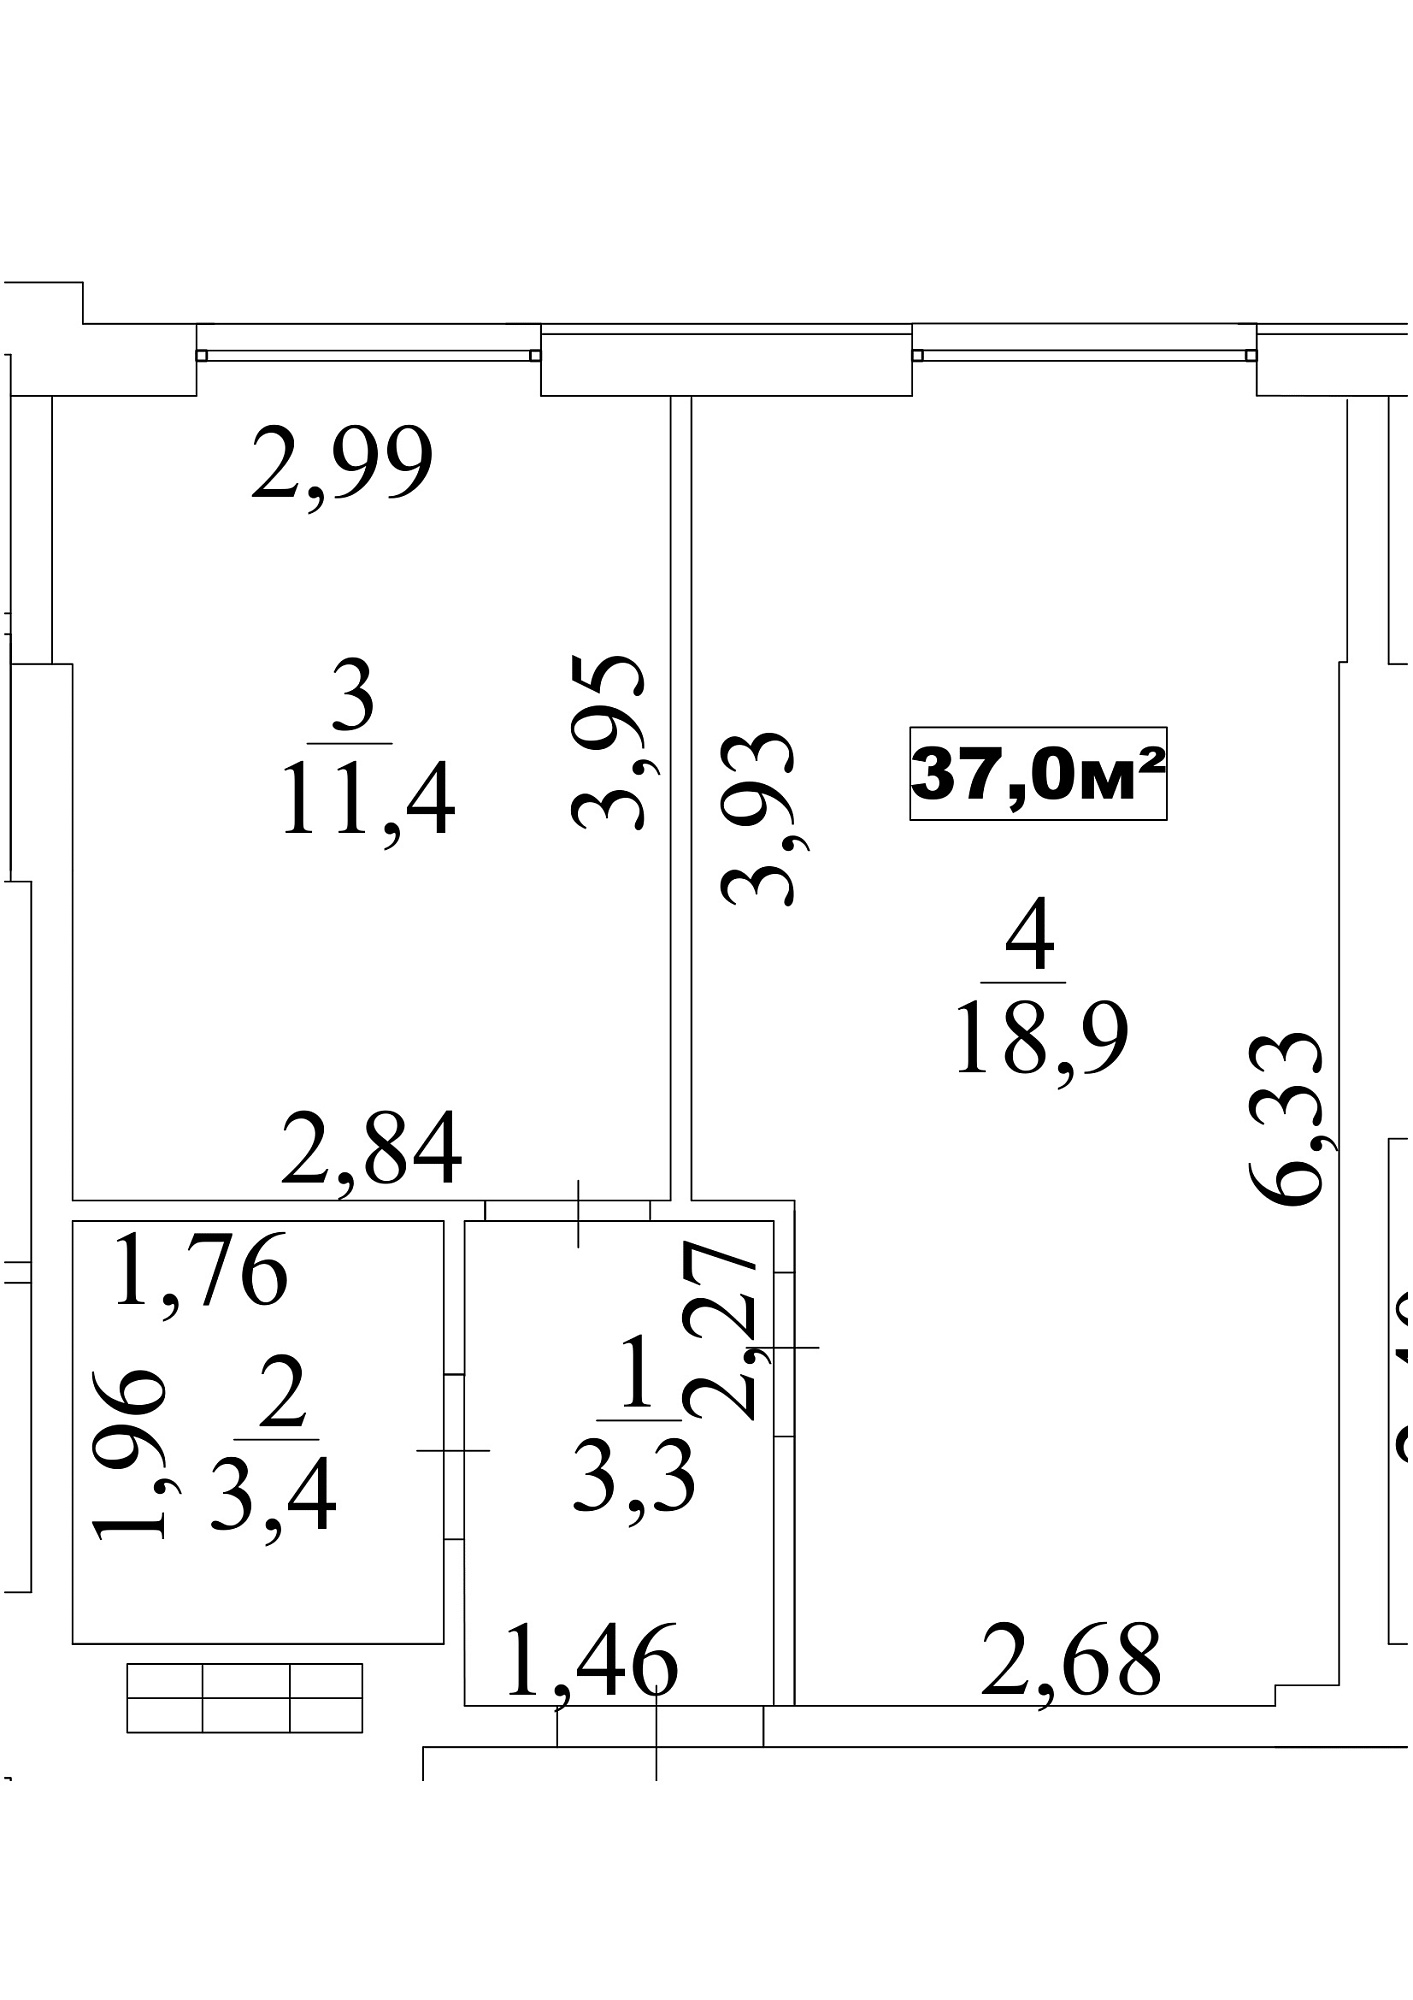 Planning 1-rm flats area 37m2, AB-10-03/00024.